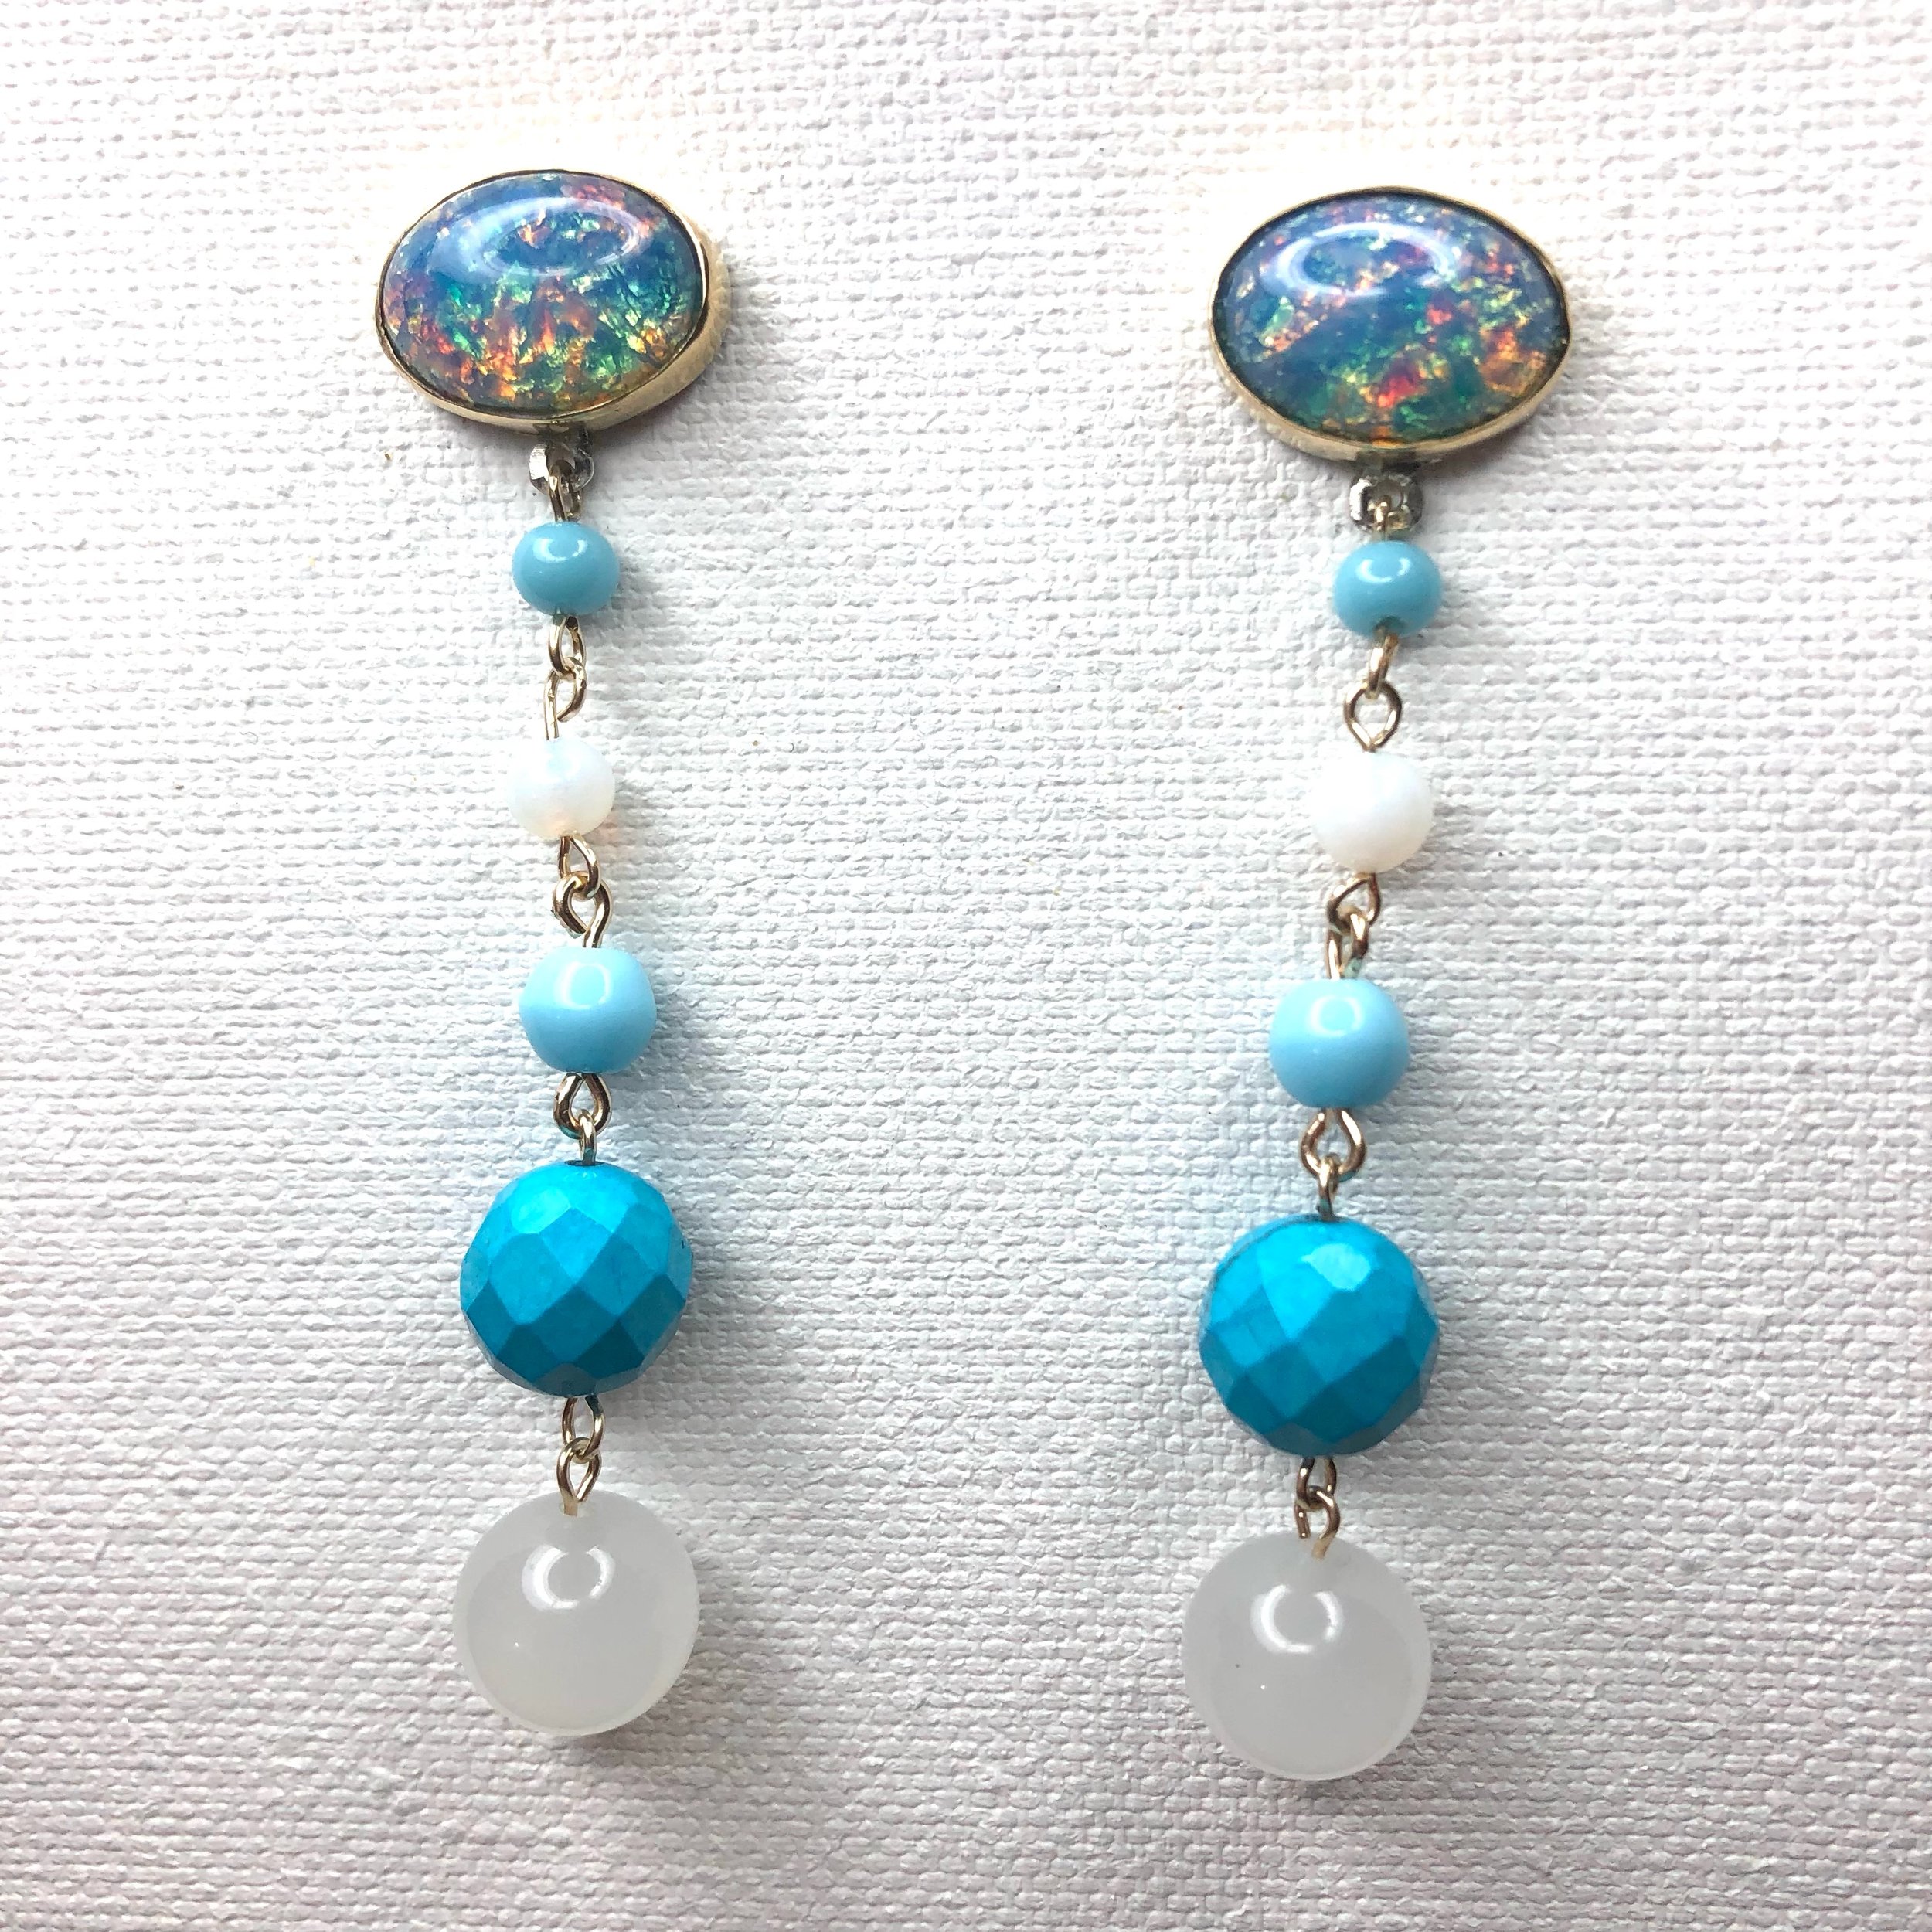  Earrings featuring vintage blue foil press glass stone, vintage glass beads, rock  crystal, turquoise, sterling silver &amp; 14k gold 